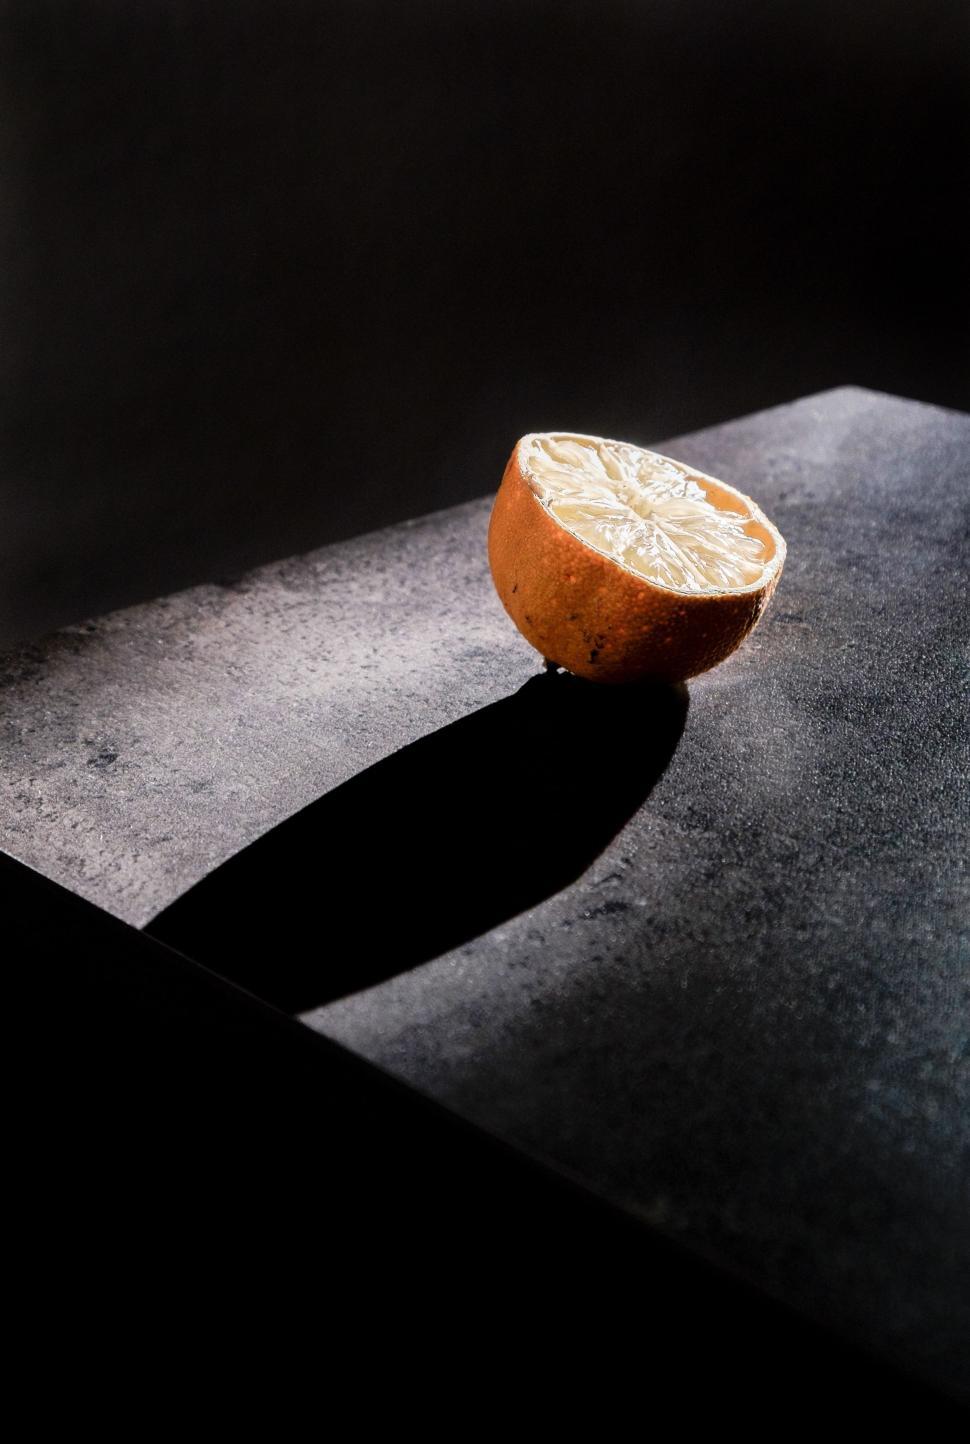 Free Image of A Piece of Bread on a Table 